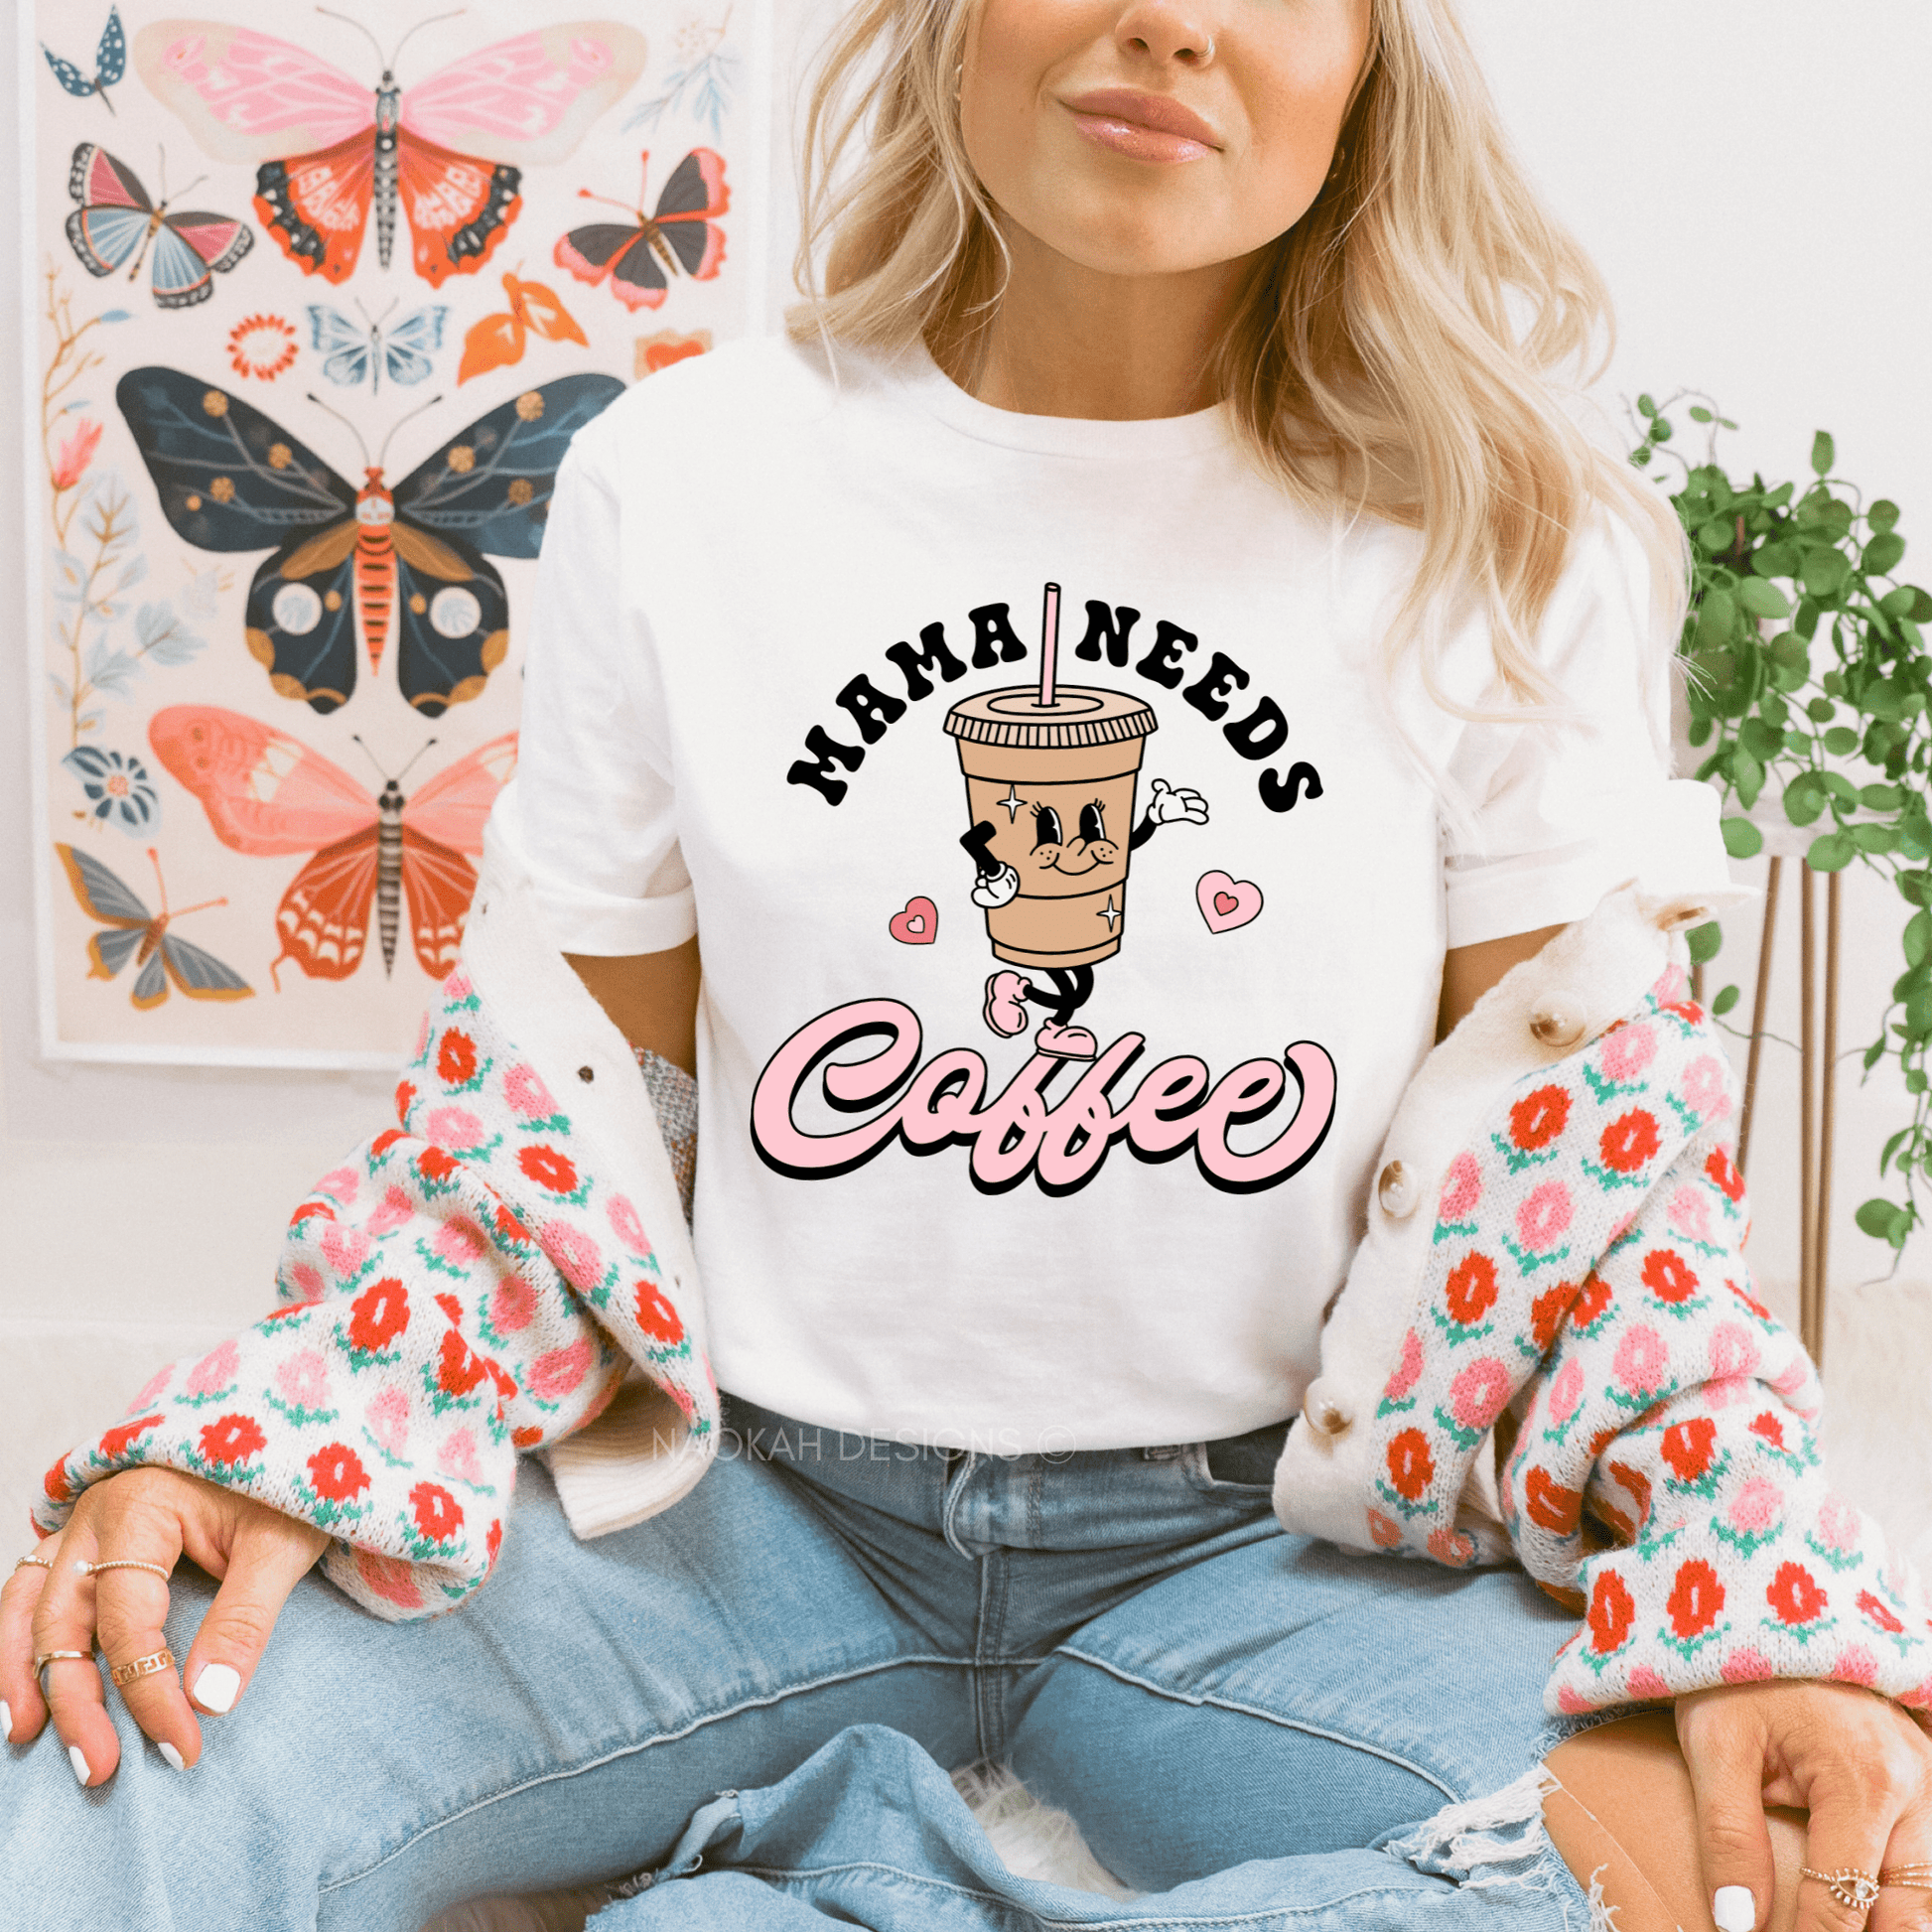 Mama Needs Coffee Shirt, Tired as a Mother, Mom Shirt, Mama T-Shirt, Coffee Lovers gift, Valentine Gifts for Mom, Valentine Gift Shirt, Retro Coffee Shirt, Retro Mom Coffee Shirt